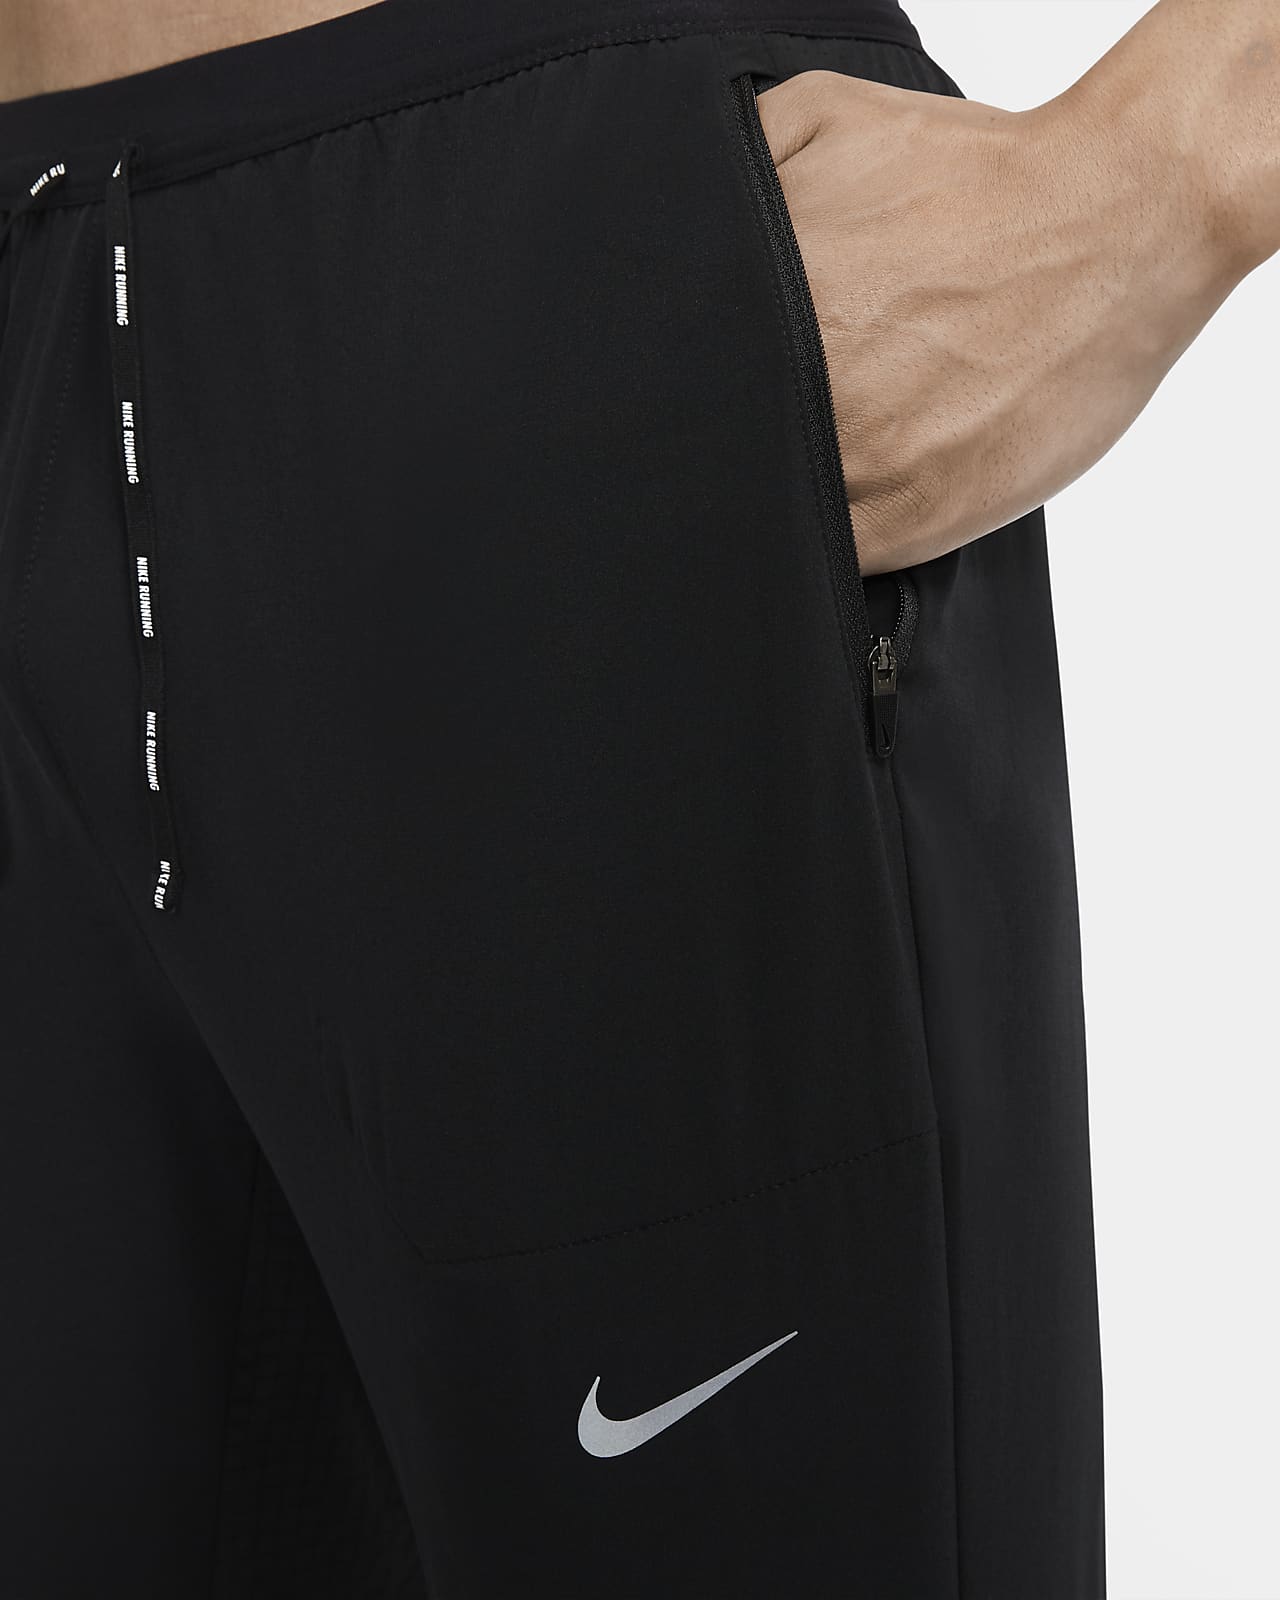 Running Shorts for Men: Shop for Active Essentials for Your Workouts |  Kohl's